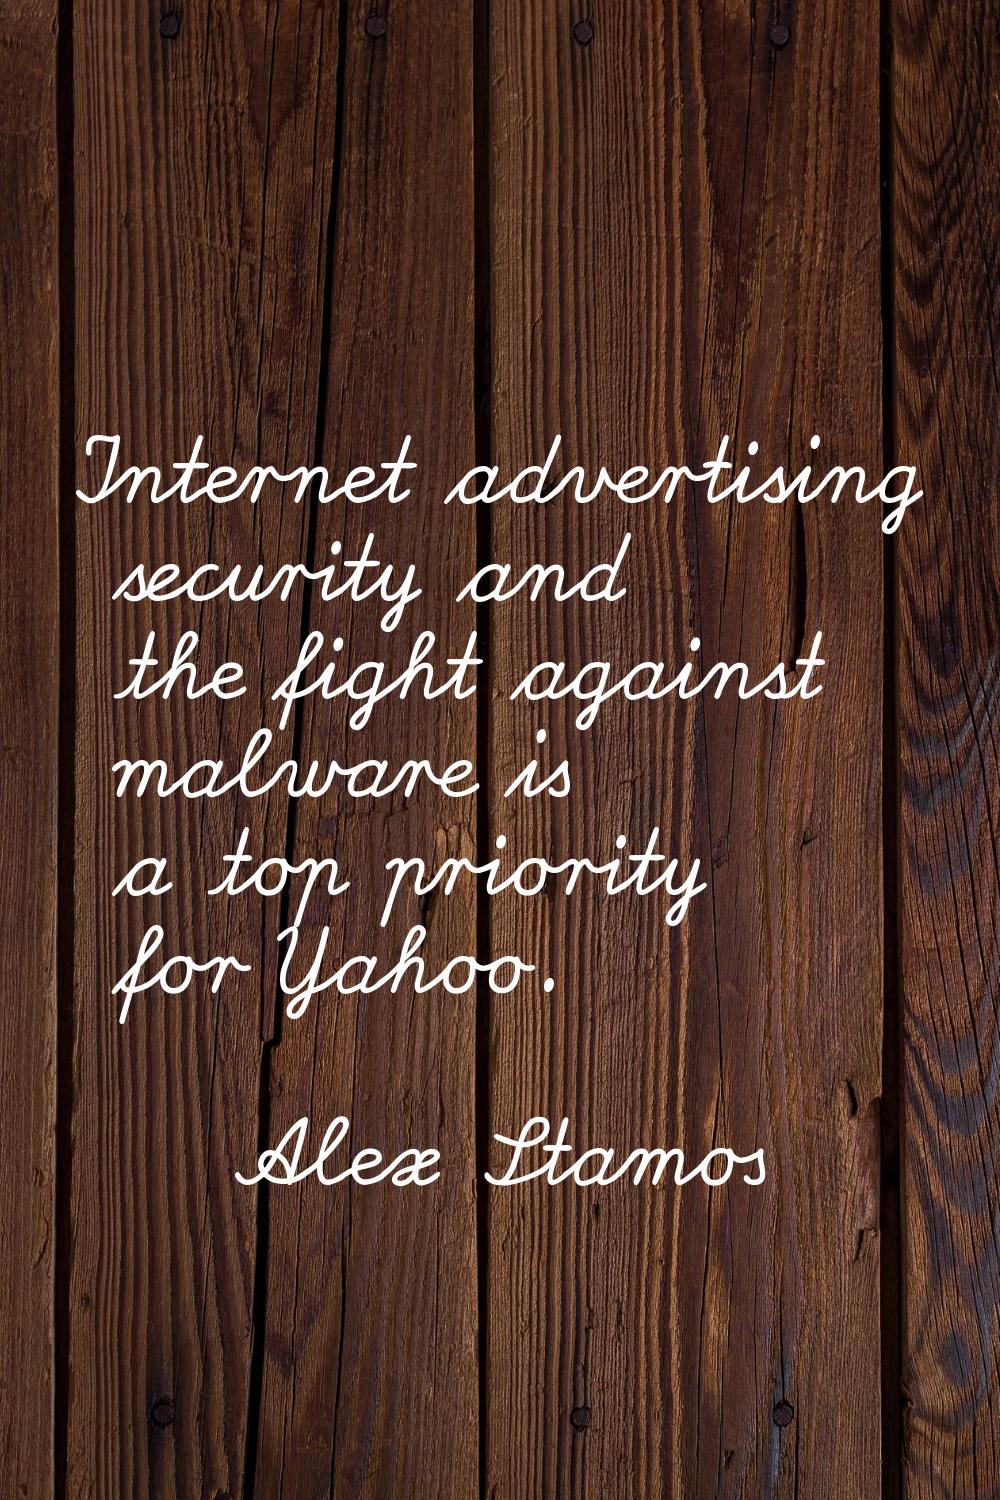 Internet advertising security and the fight against malware is a top priority for Yahoo.